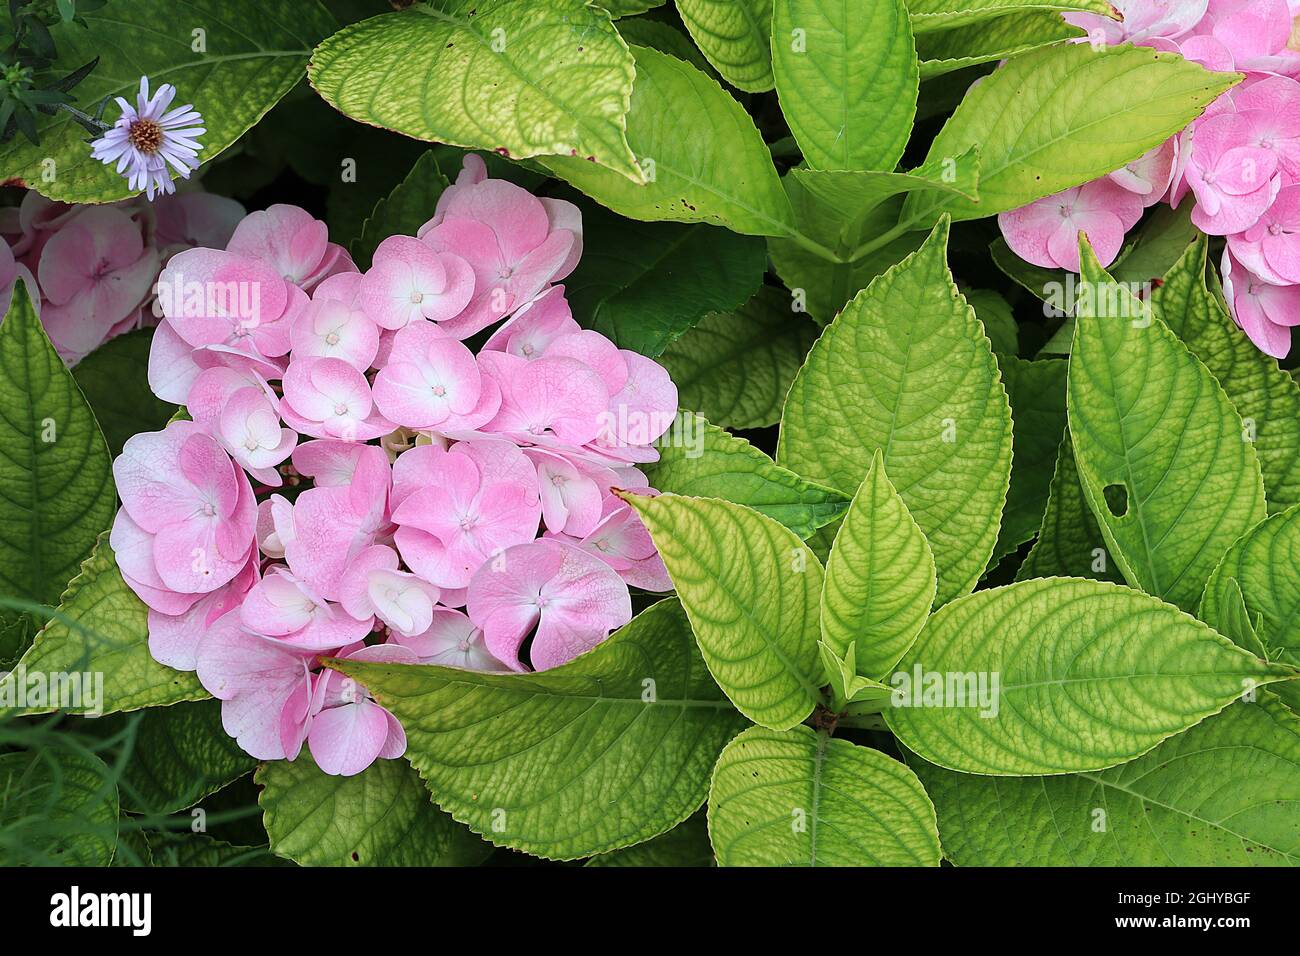 Hydrangea macrophylla ‘All Summer Beauty’ Hortensia All Summer Beauty – medium pink flowers with white centre and fresh green leaves with green veins Stock Photo